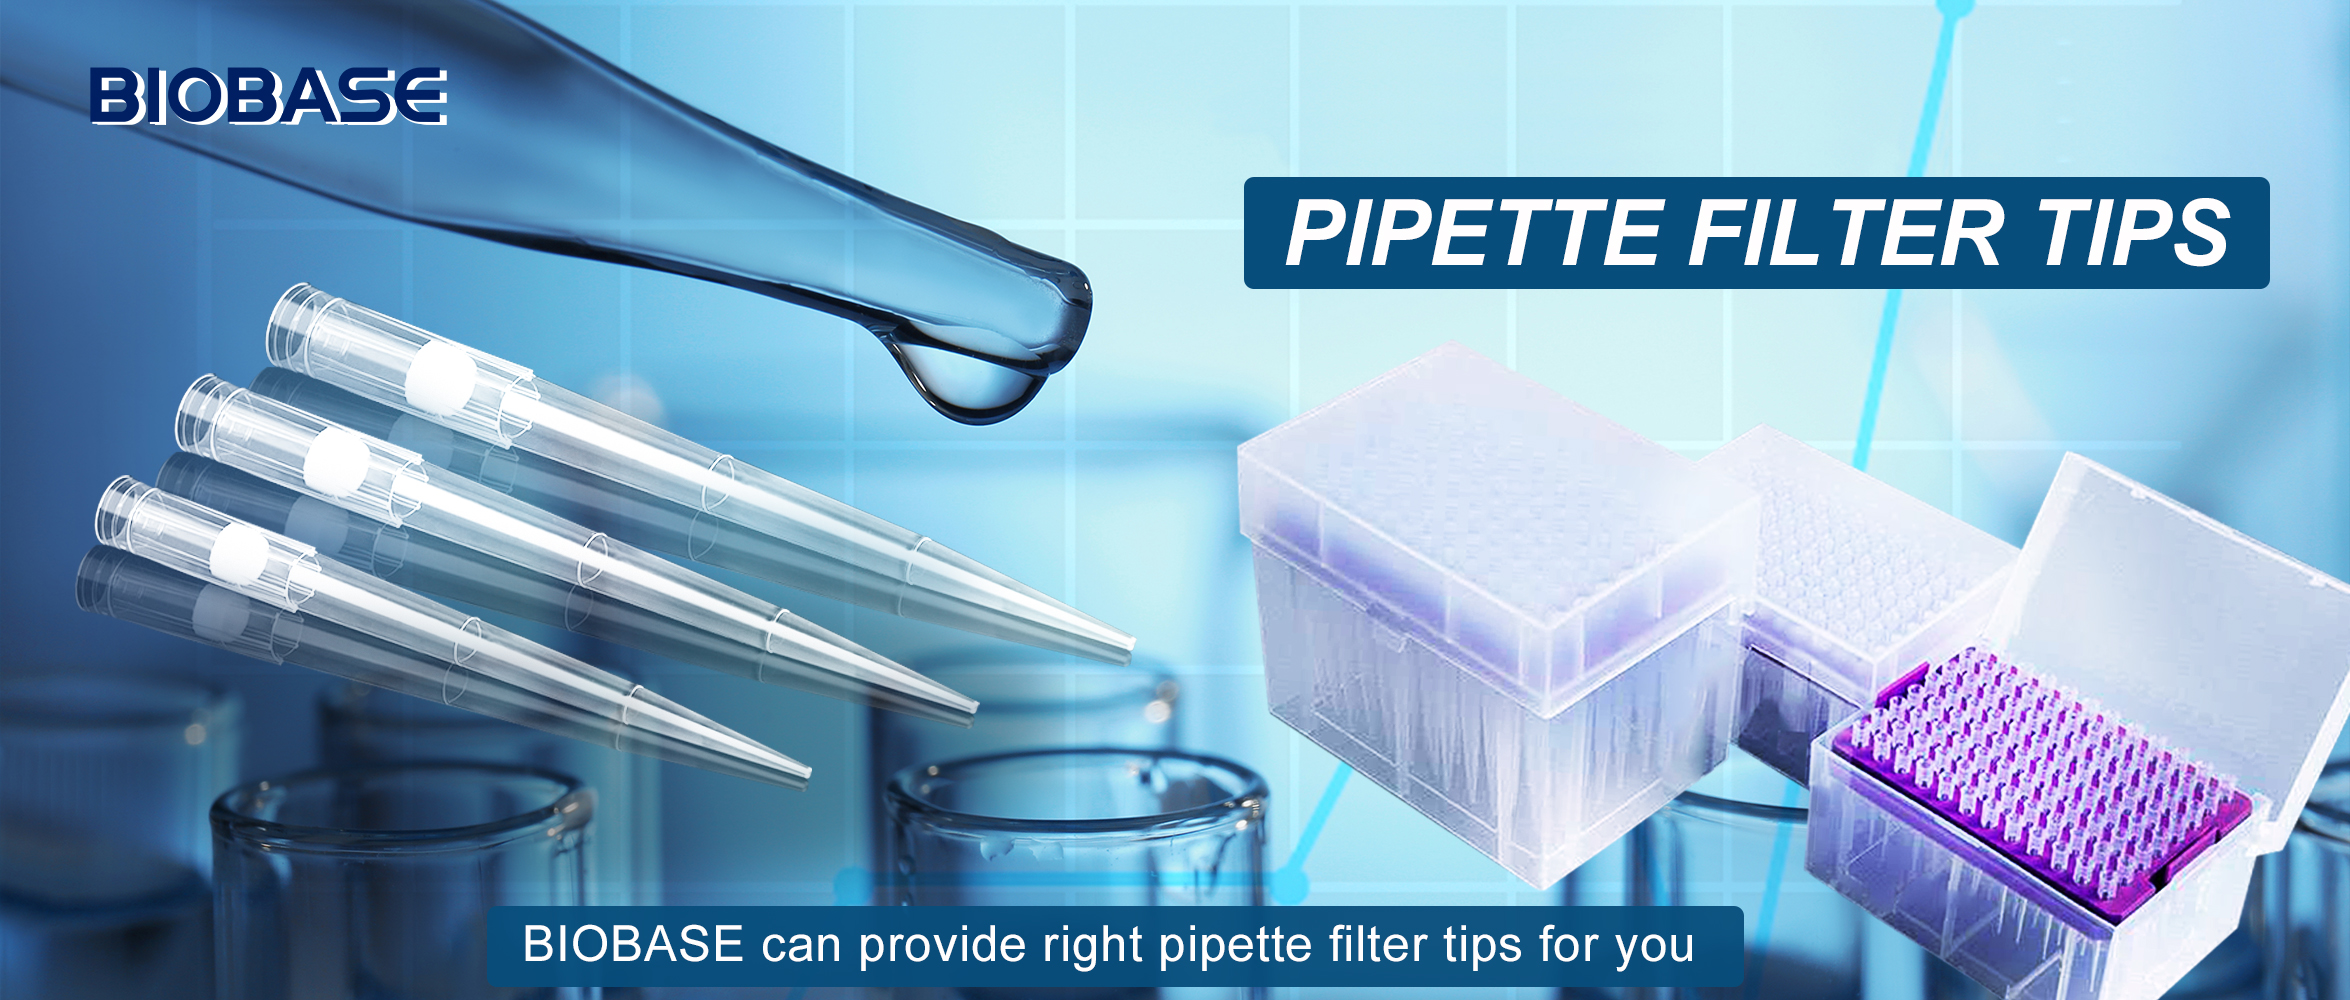 HOW TO CHOOSE THE RIGHT PIPETTE TIPS FOR YOUR EXPERIMENT